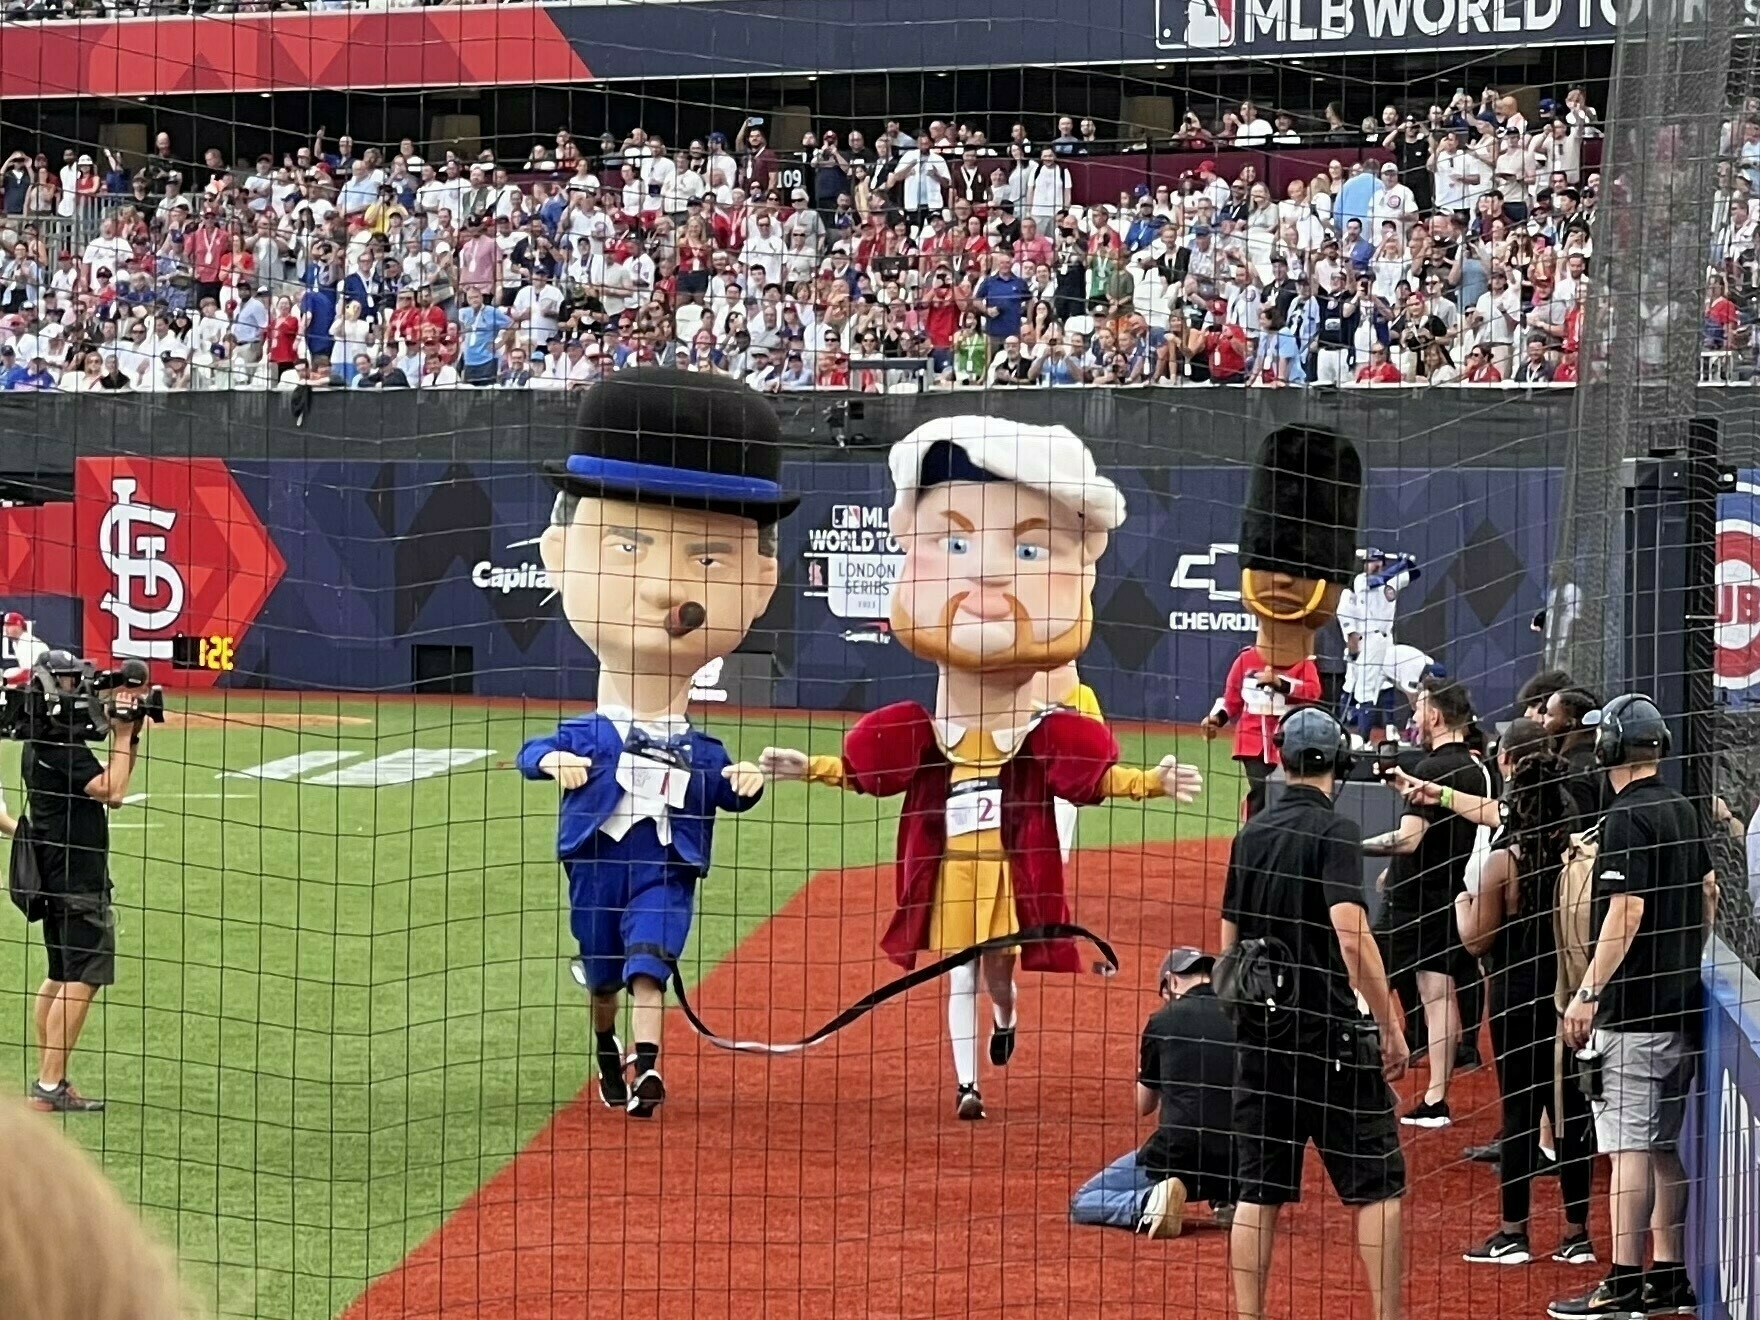 A mascot race at the MLB game in London. King Henry VIII edges out Winston Churchill with a royal guard some way behind.